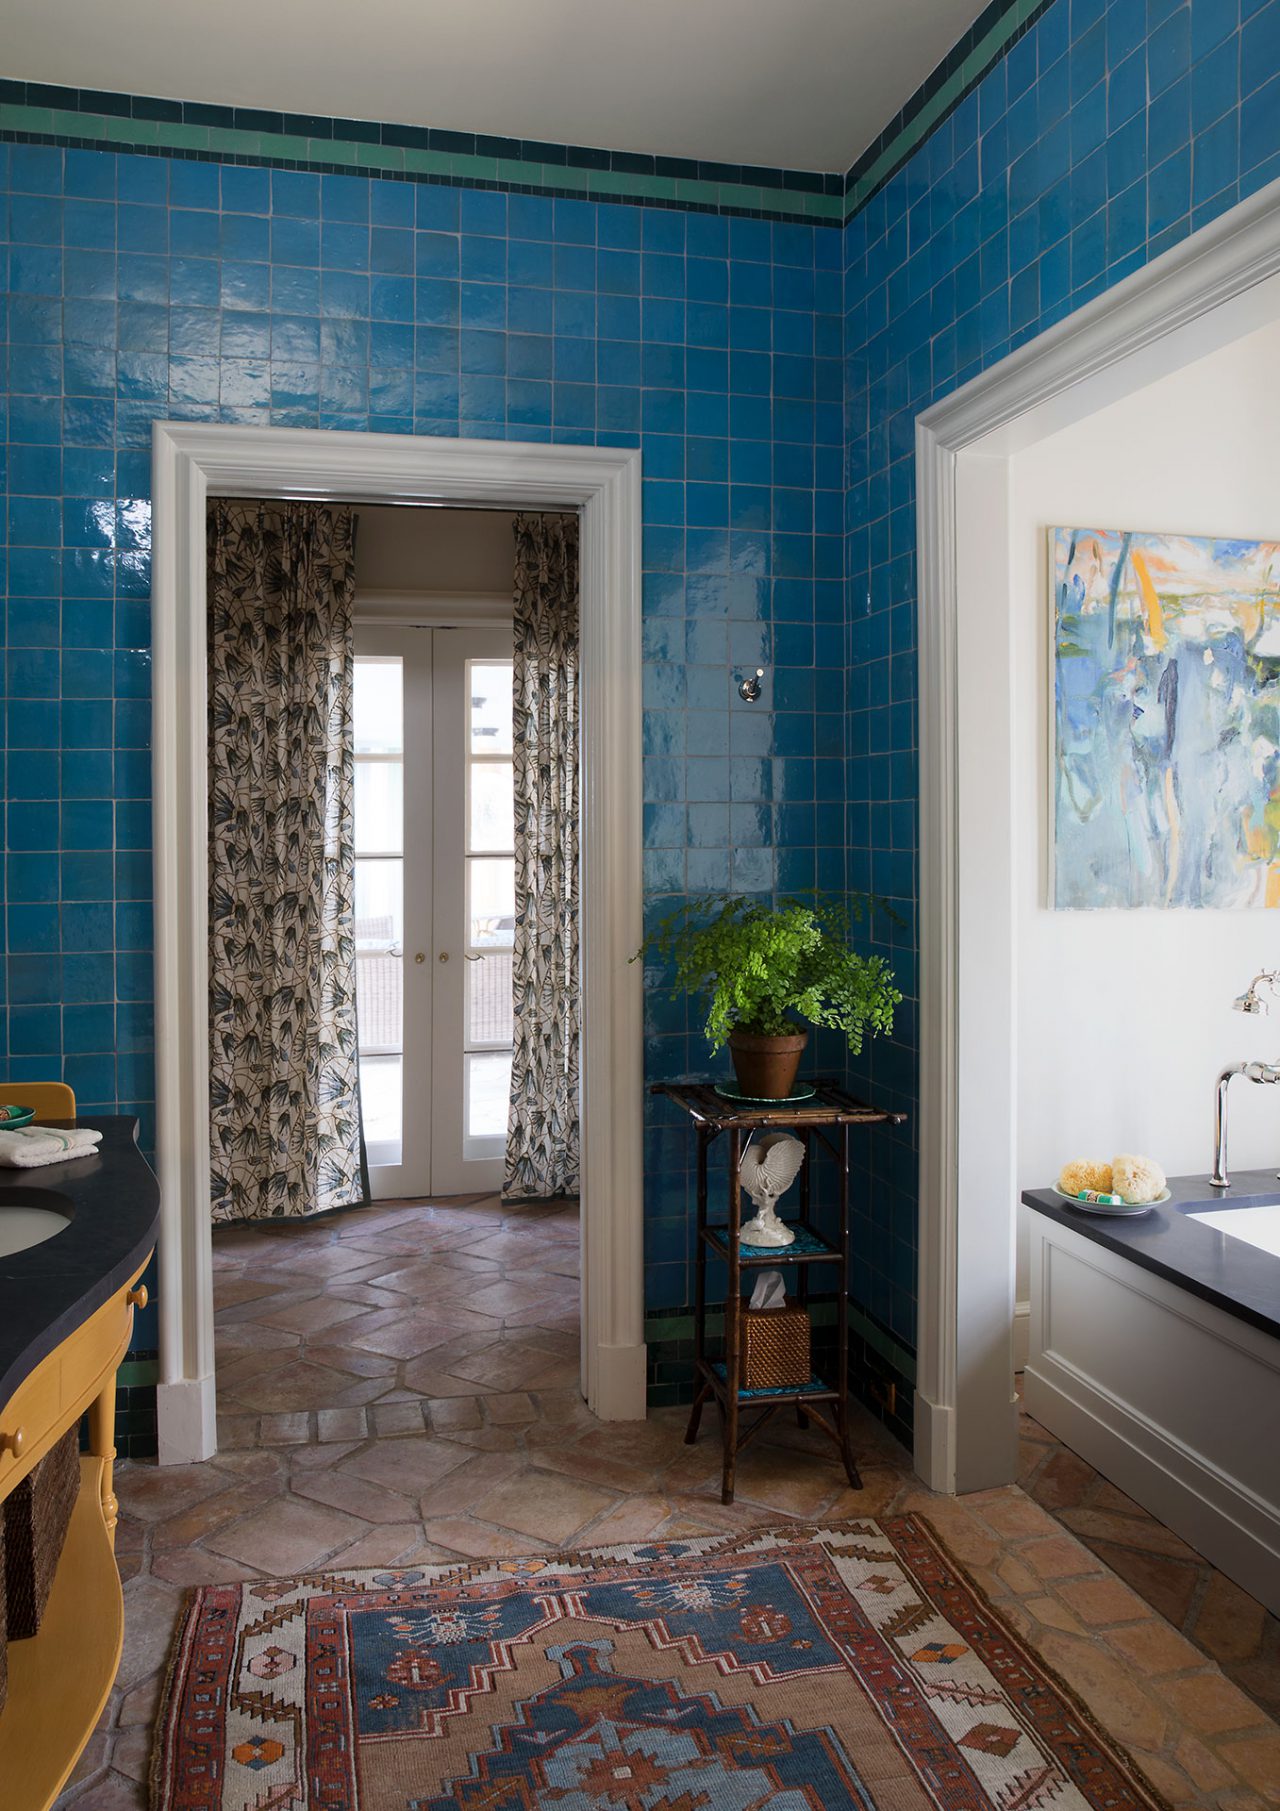 Bathroom with blue tile walls